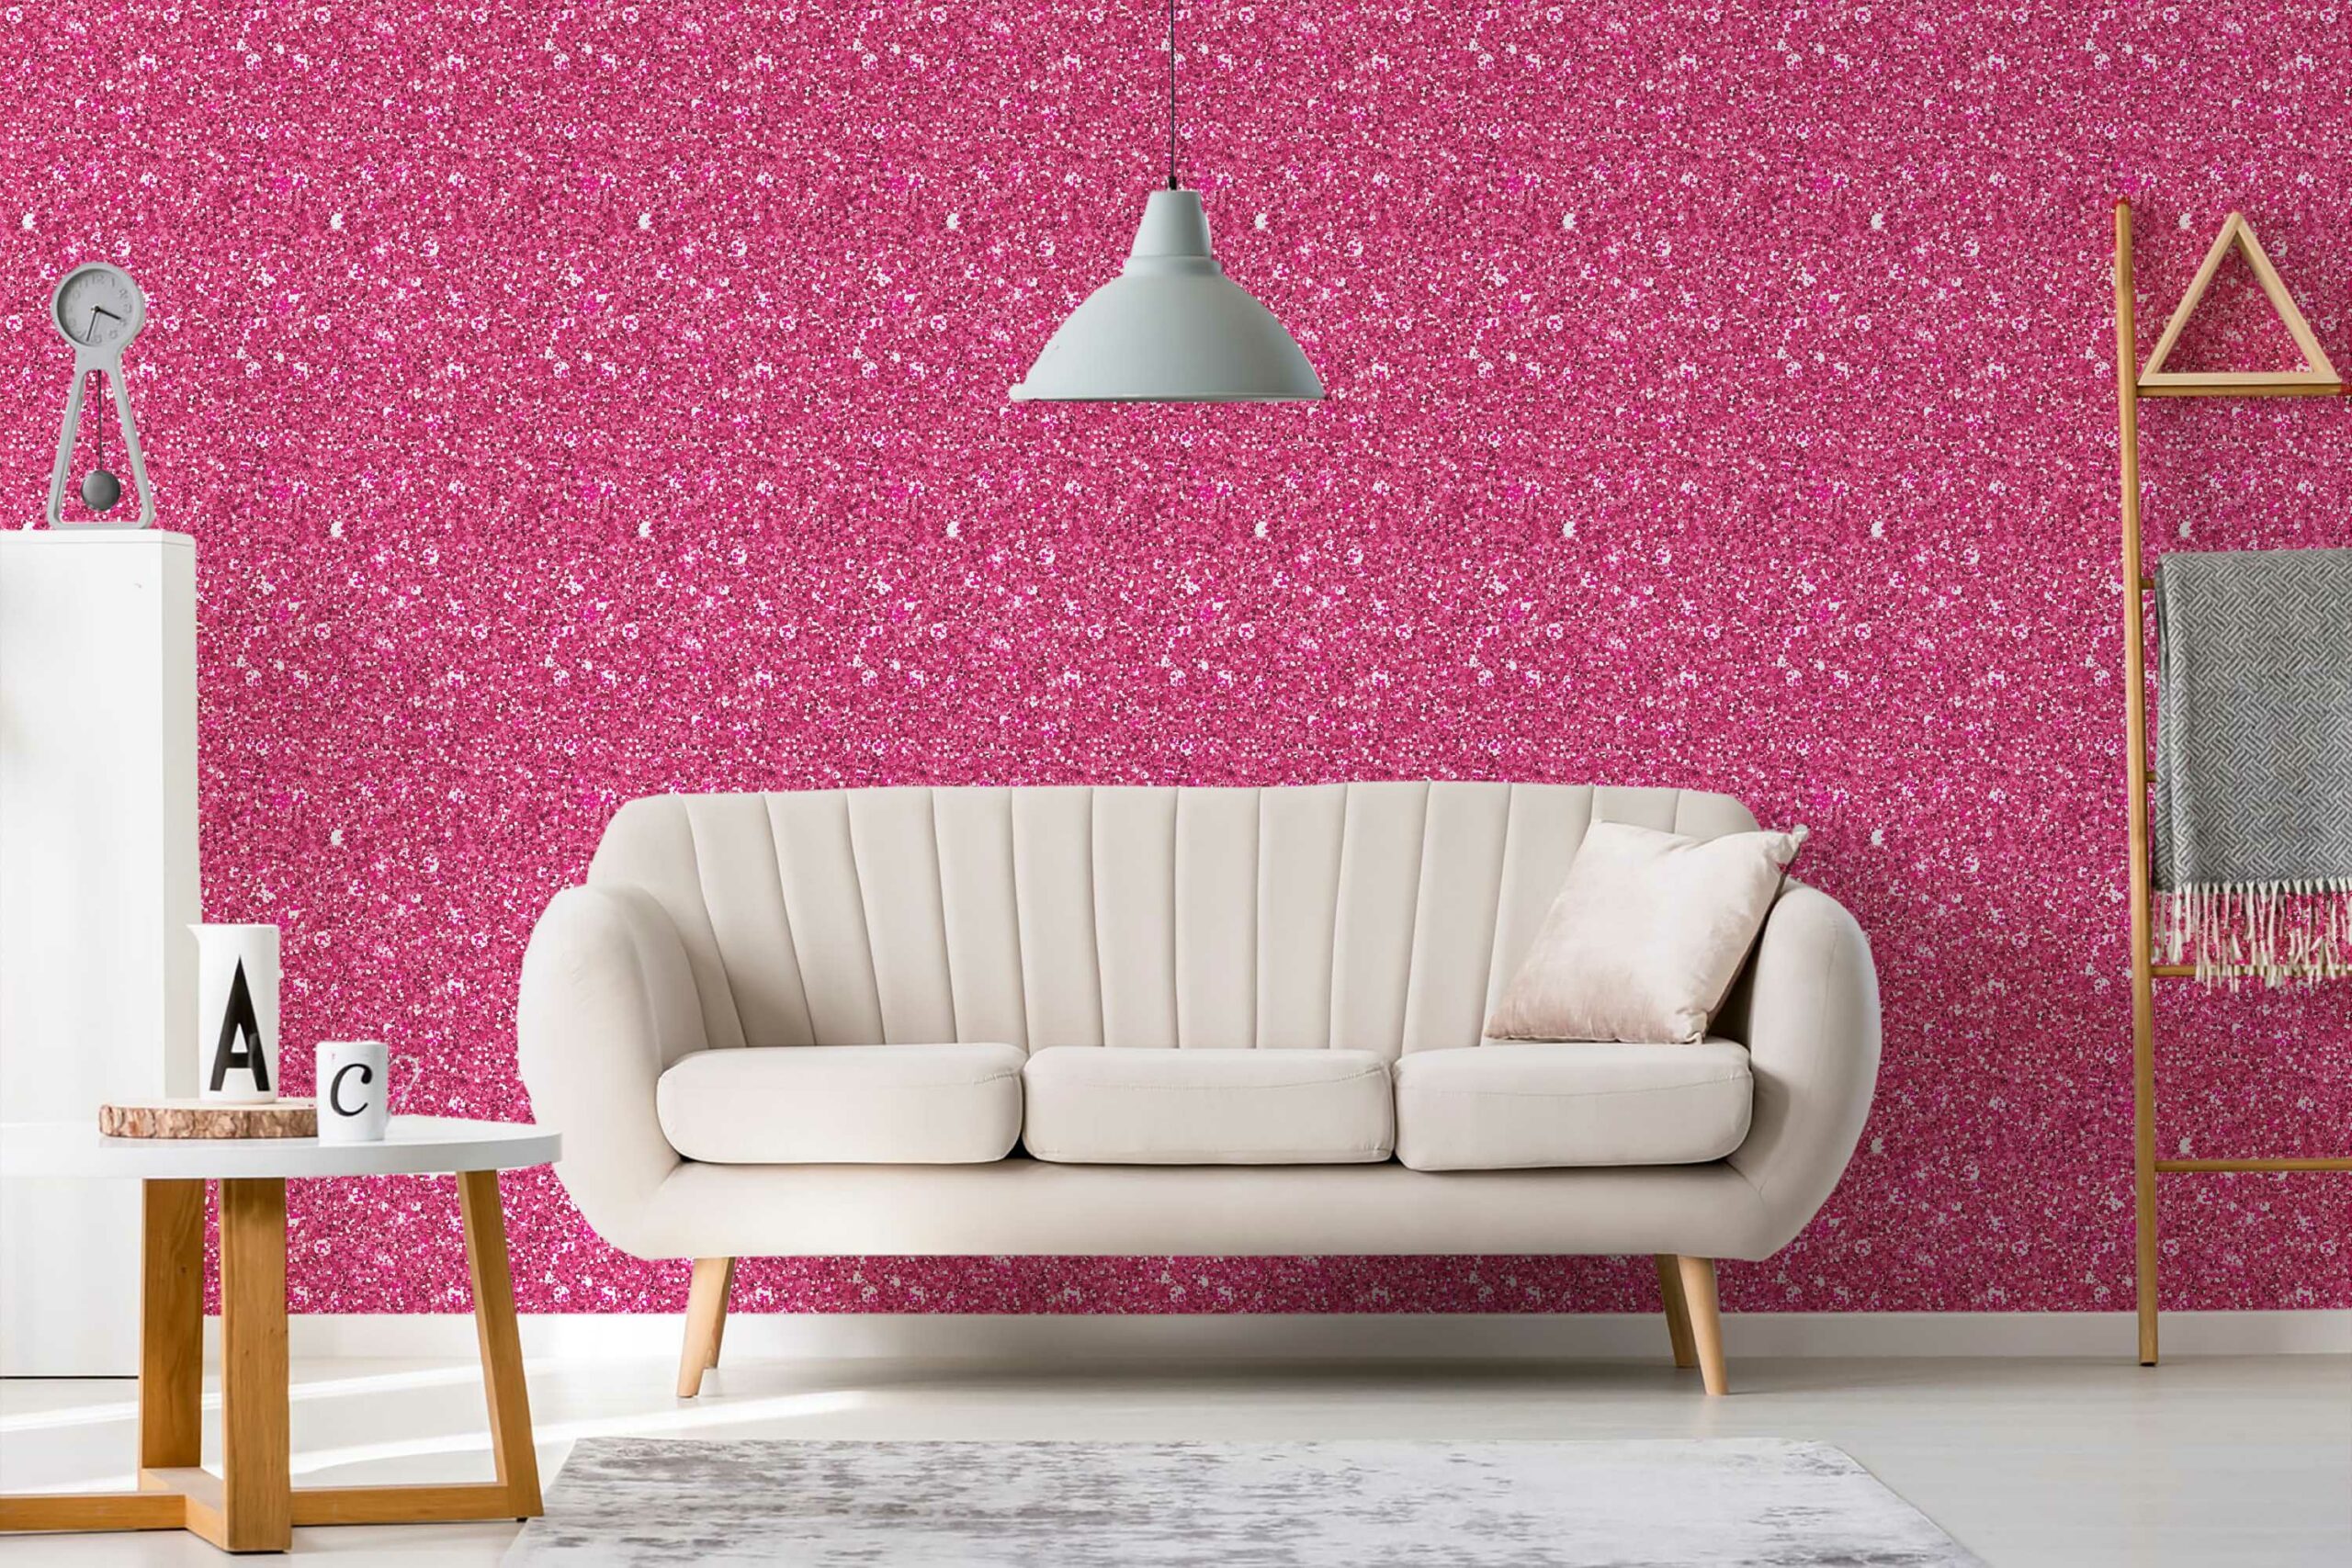 A Glitter Wall for A Kid's Room?  Glitter paint for walls, Glitter wall,  Sparkly walls